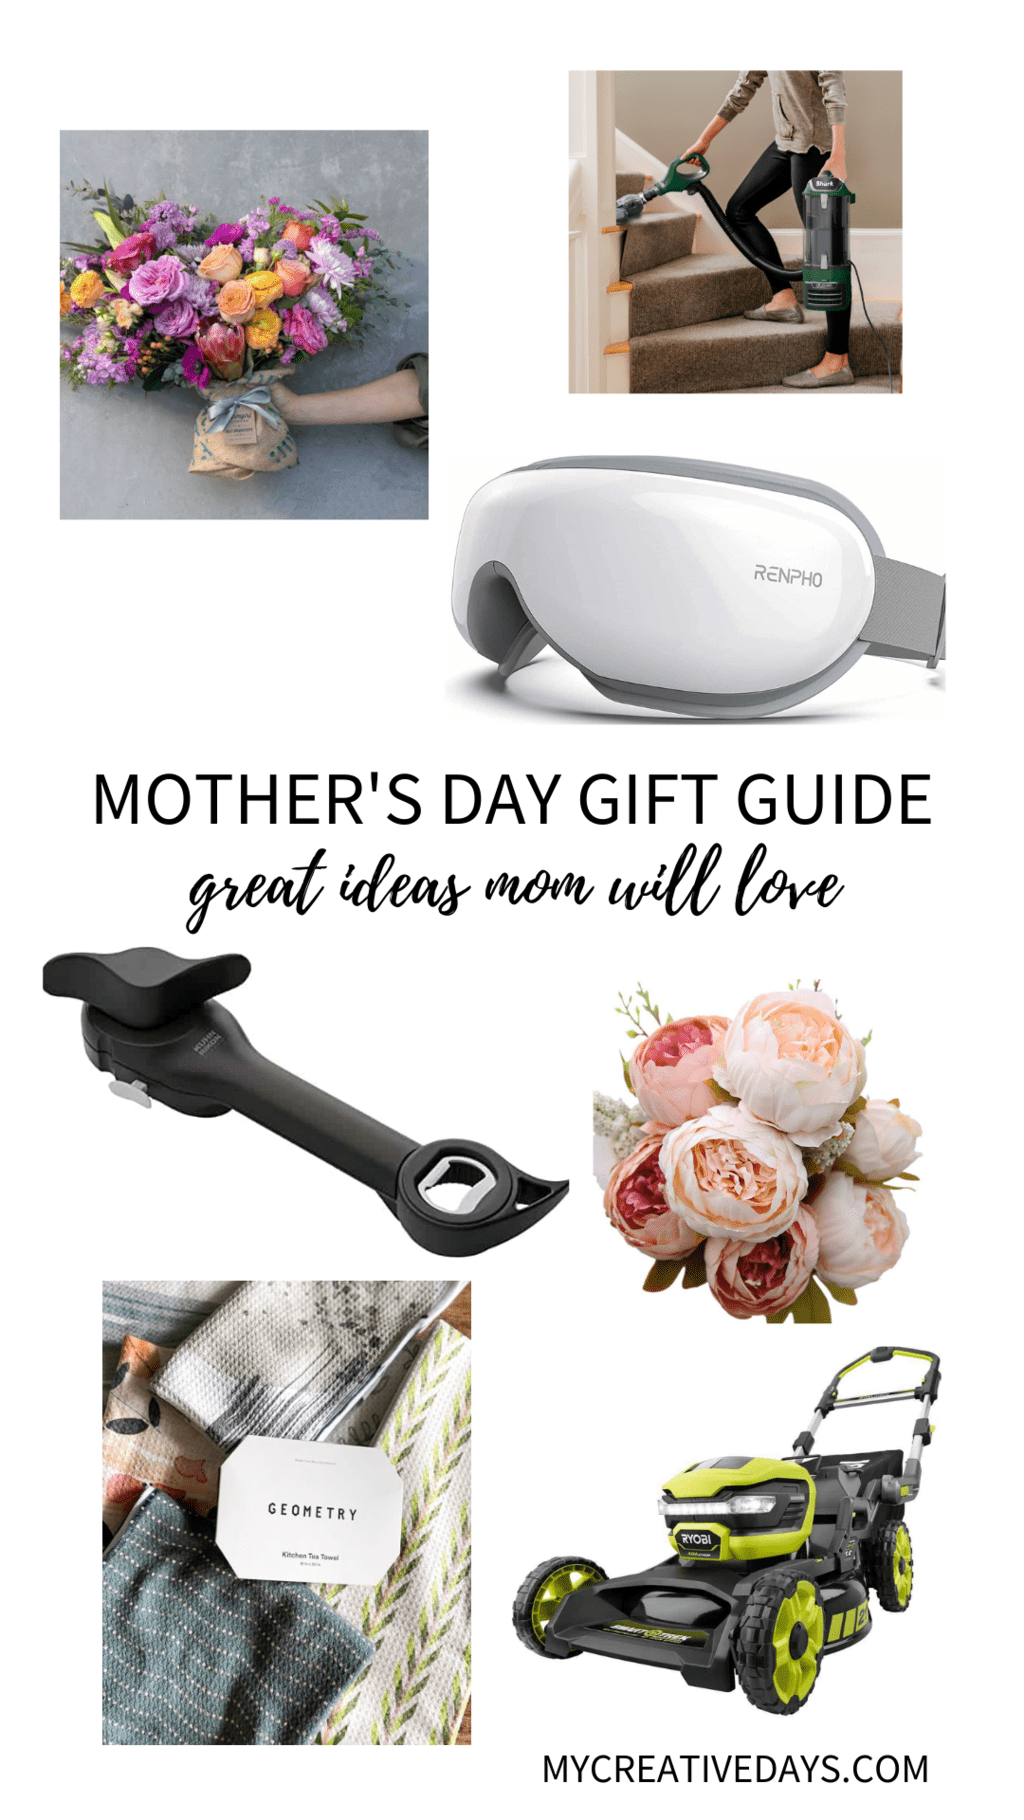 This Mother's Day gift guide is a full list of gift ideas that Mom is sure to love and wouldn't get for herself.